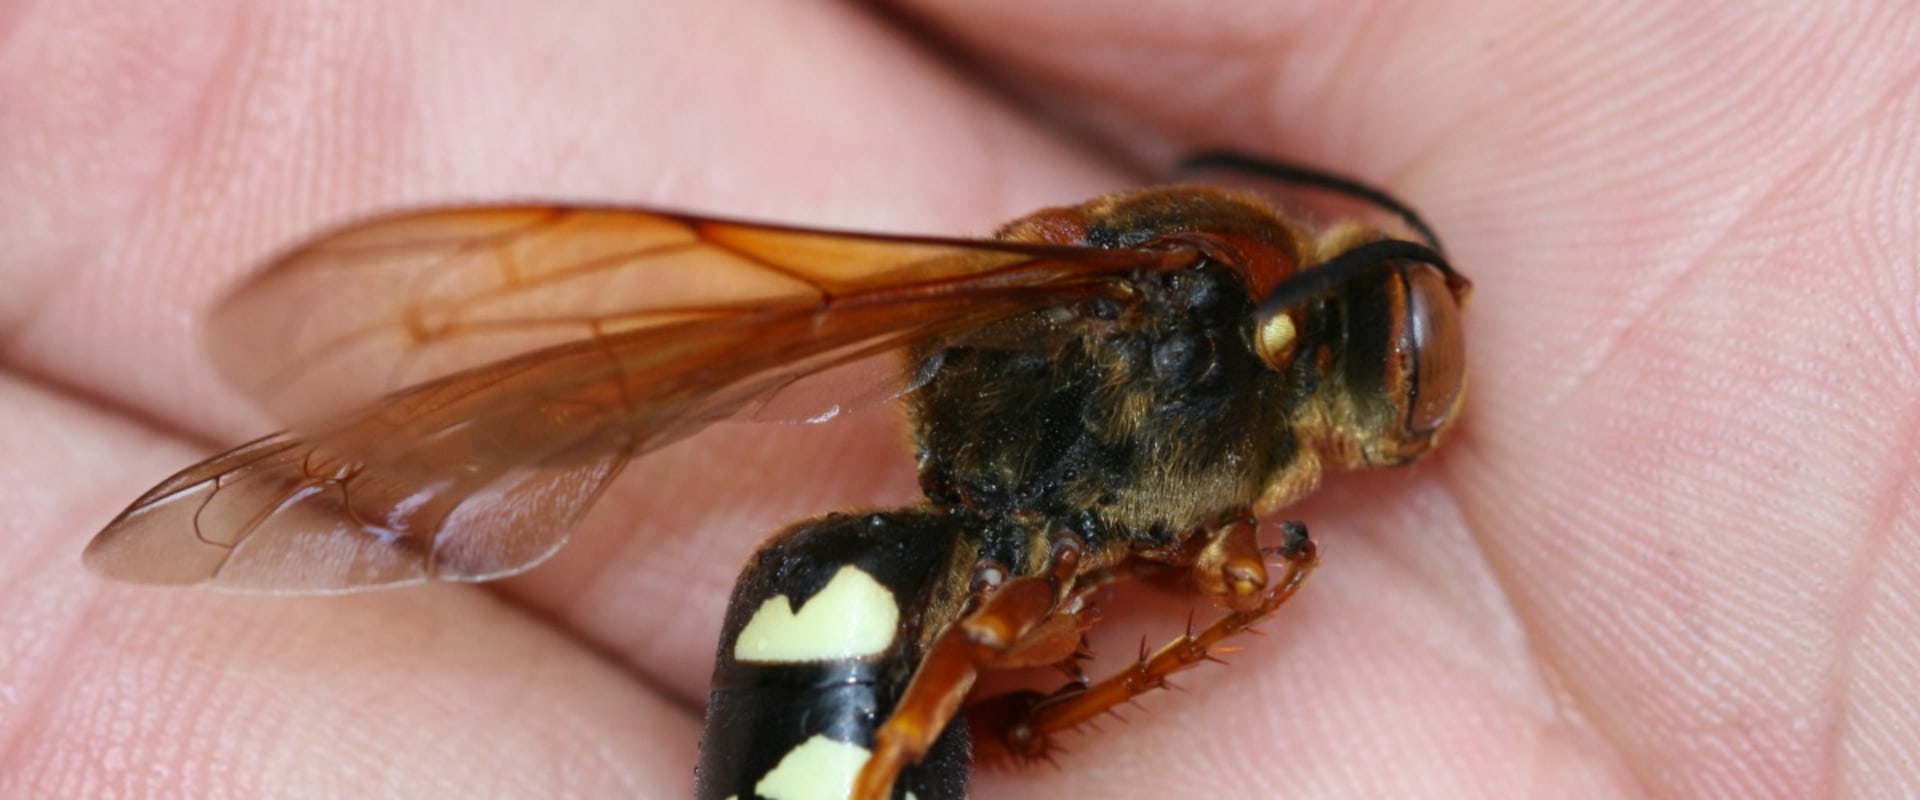 Exploring the Habitats of Bald-Faced Hornets